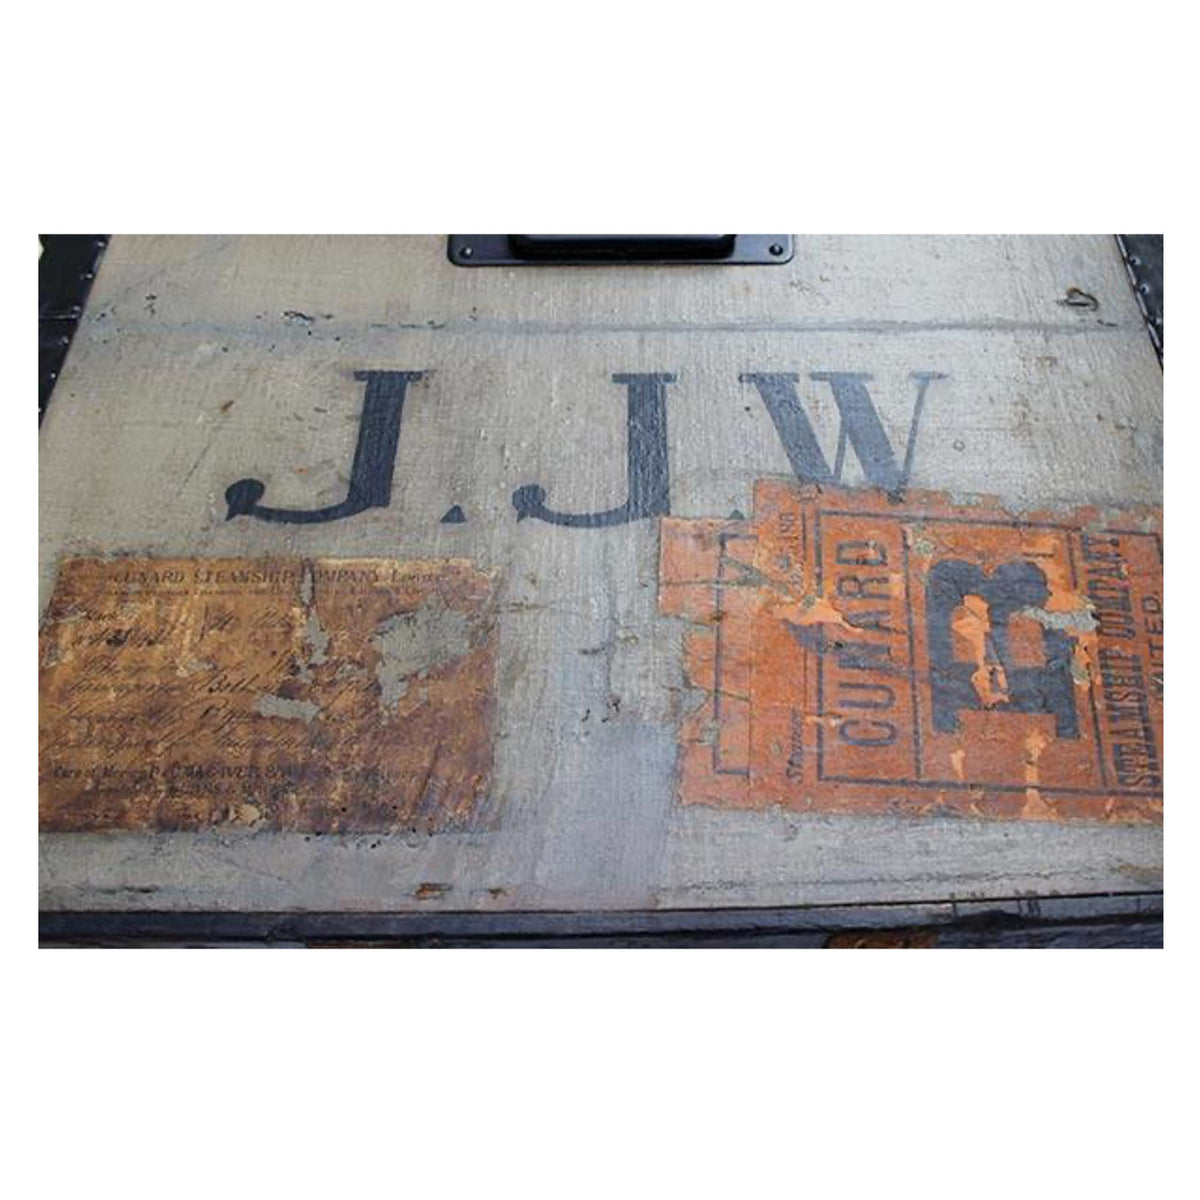 Courier Trunk wth JJW initials